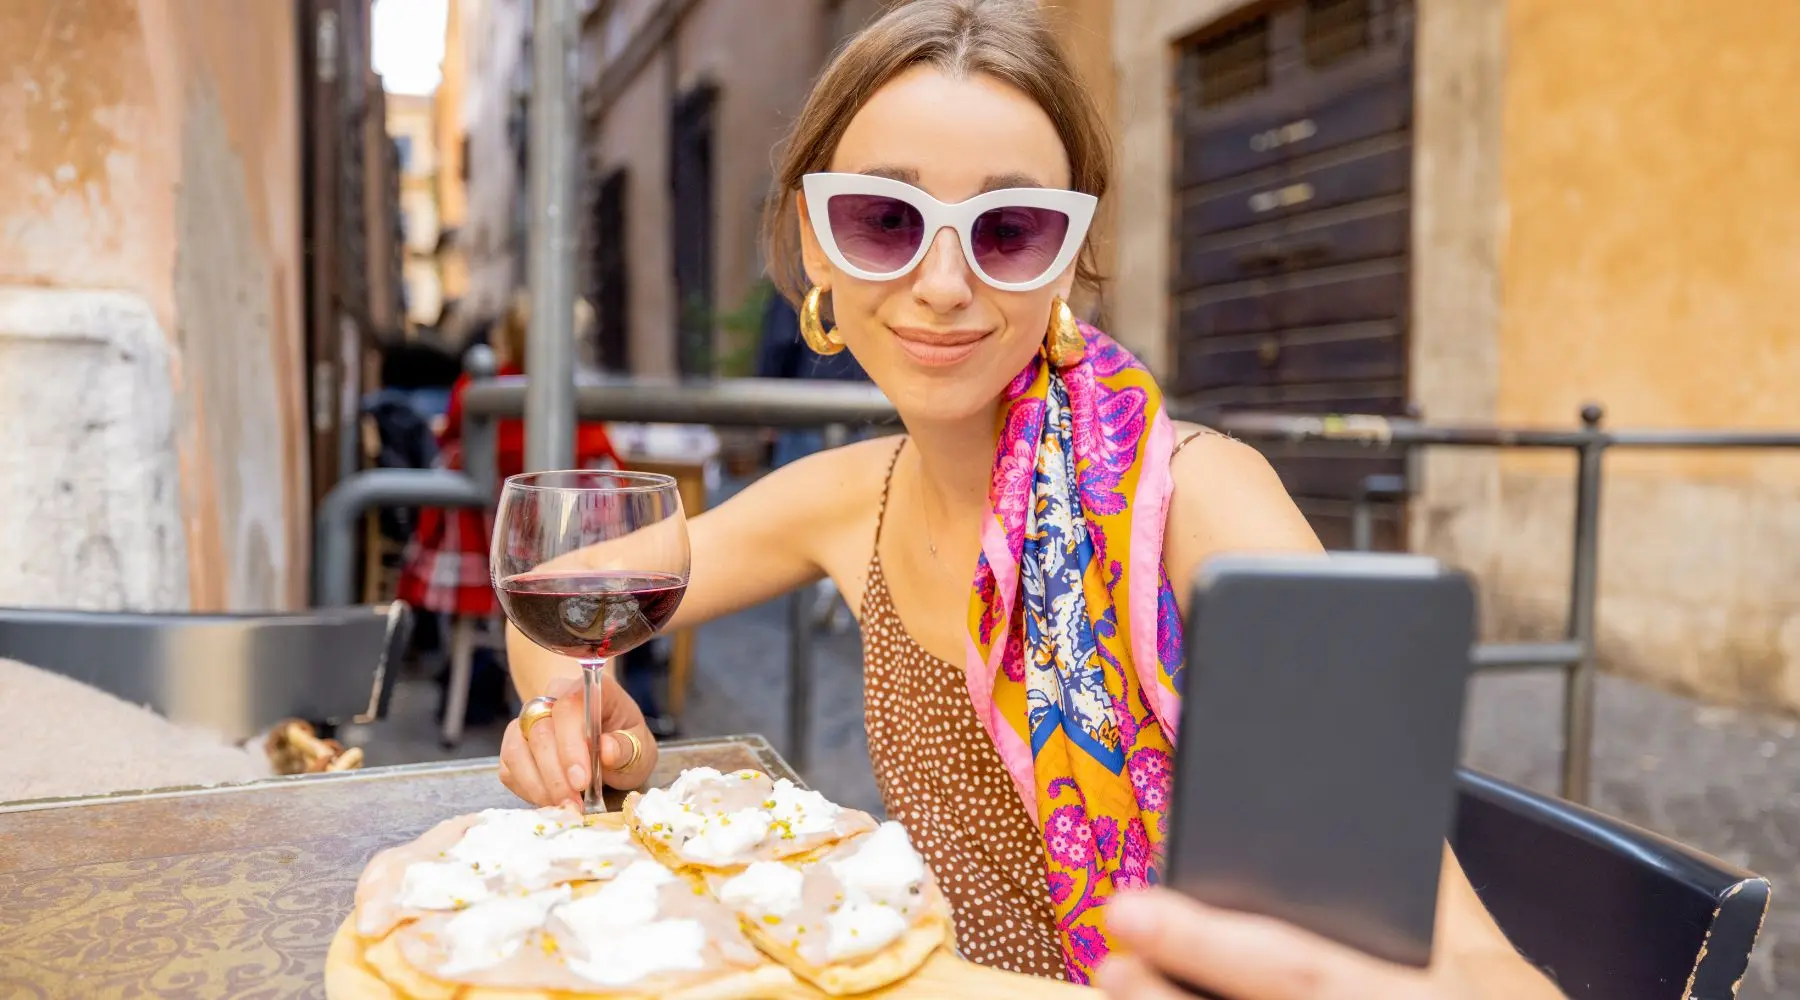 Woman on her phone while eating pizza in Italy